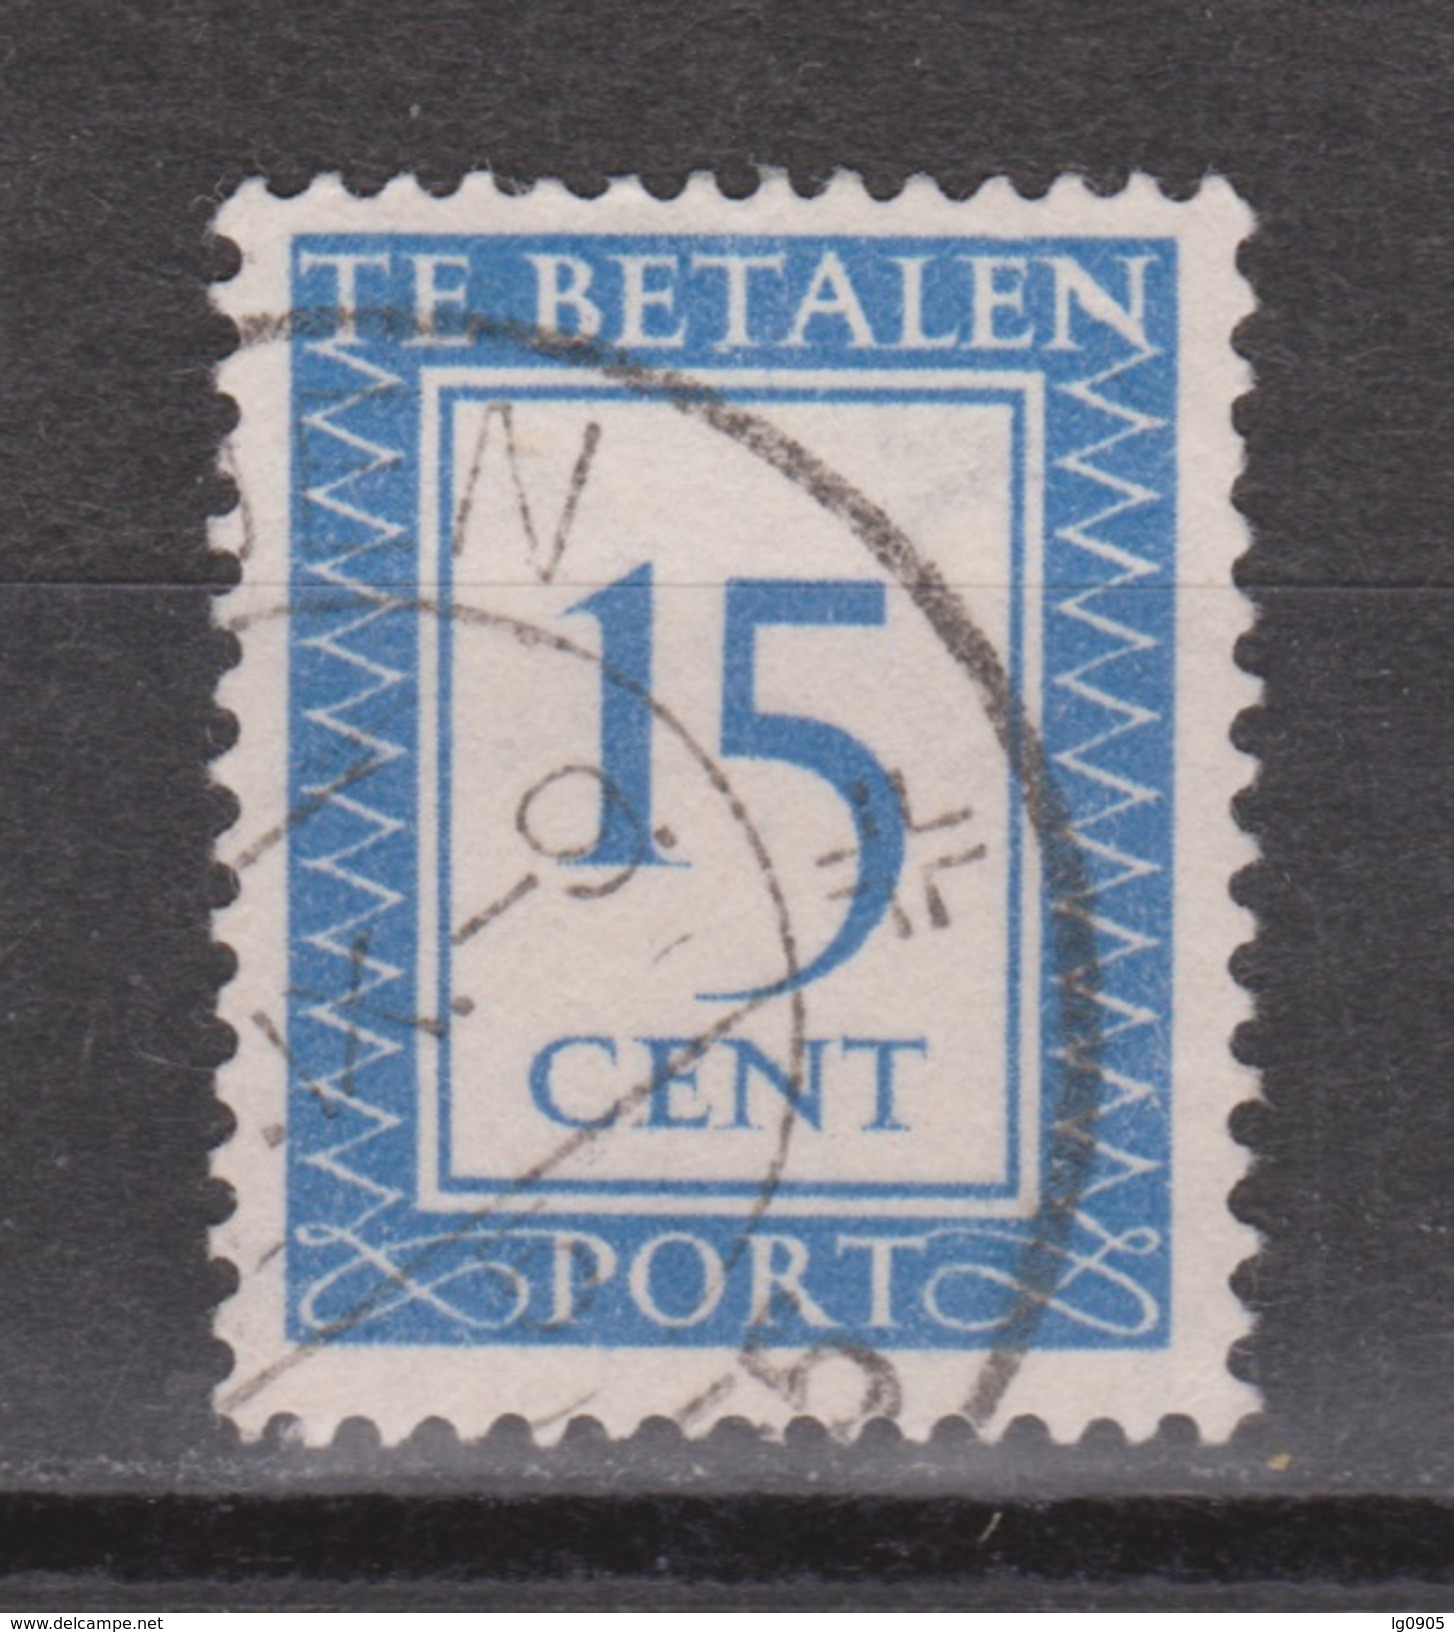 NVPH Nederland Netherlands Holanda Pays Bas Port 91 Used Timbre-taxe, Postmarke, Sellos De Correos NOW MANY DUE STAMPS - Postage Due